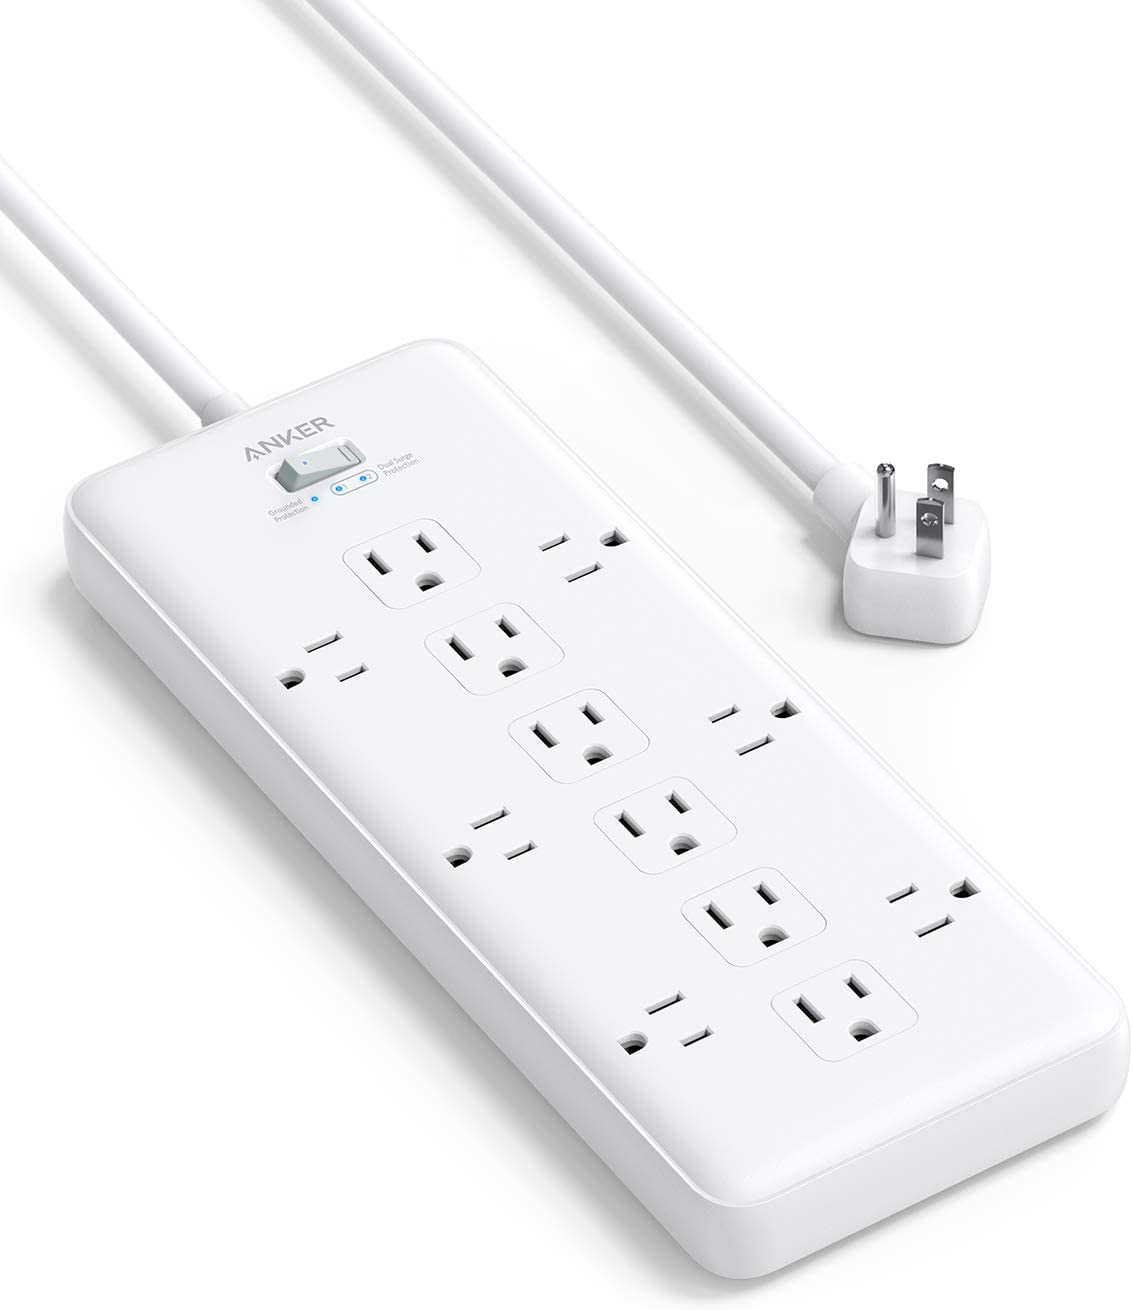 Anker Power Strip Surge Protector (2 × 4000 Joules), PowerExtend Strip 12 Outlets with Flat Plug, 1875W Output, 6ft Extension Cord $18.69